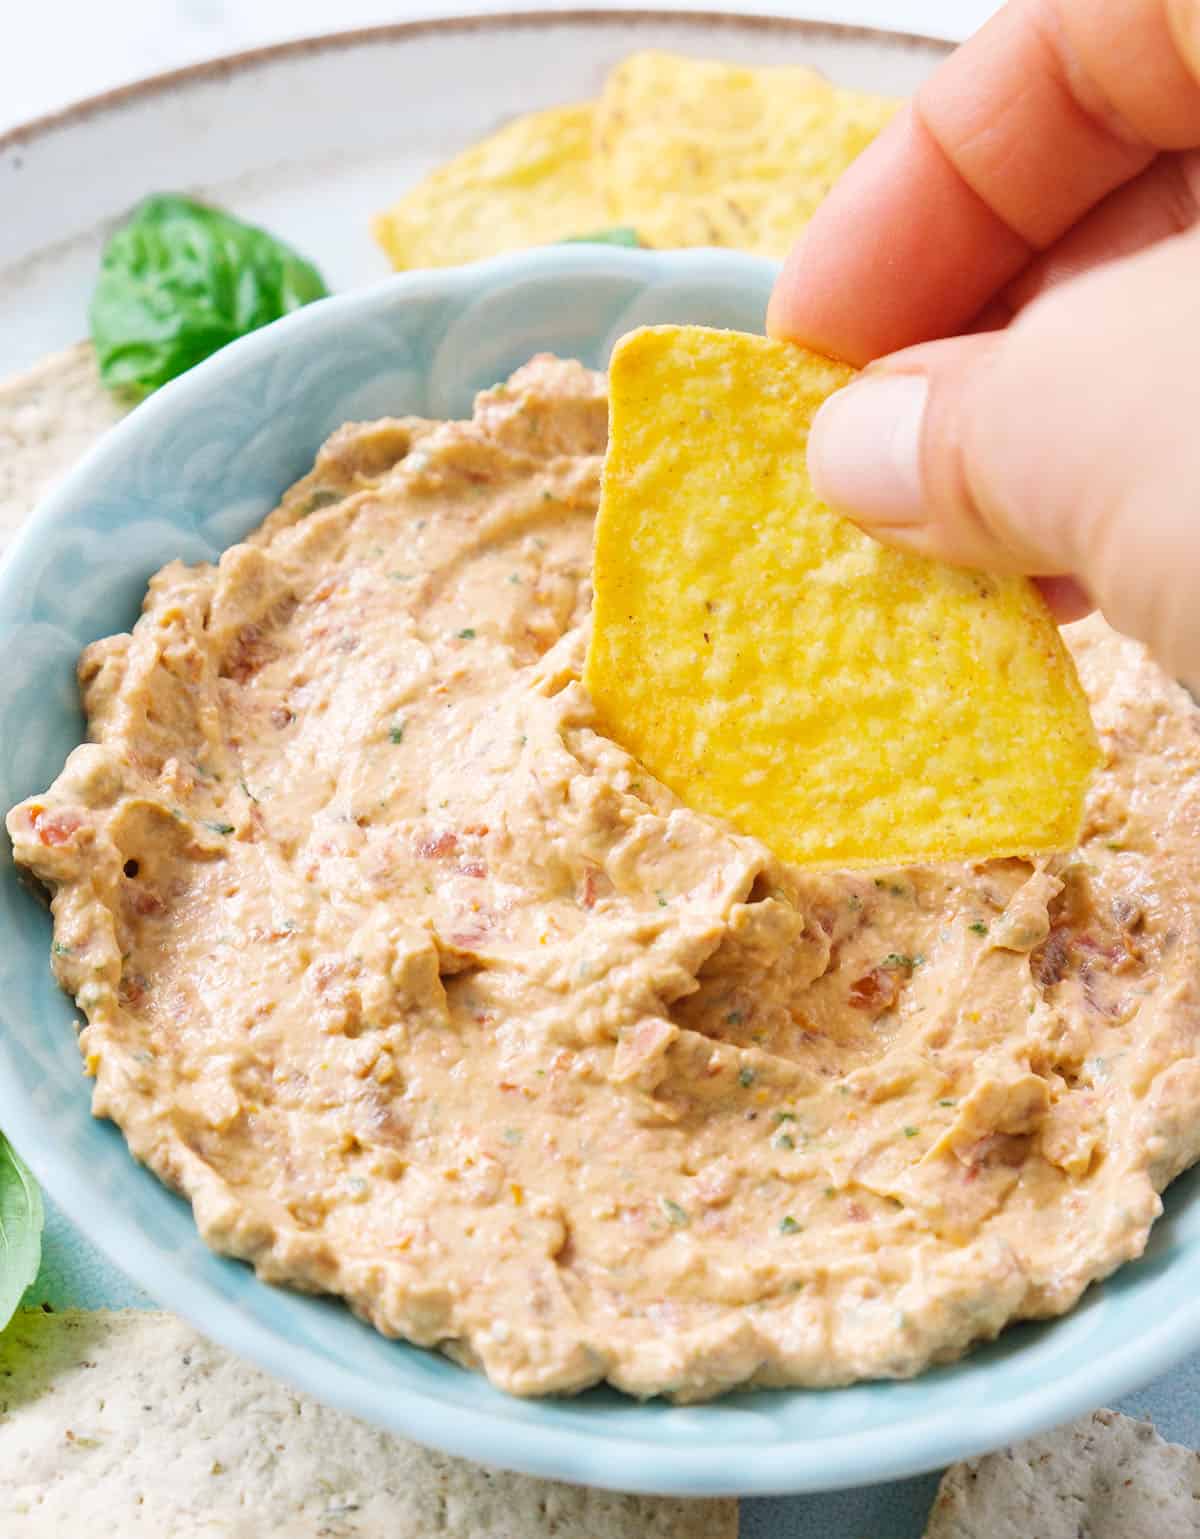 Close-up of a turquoise bowl full of sun dried tomato cream cheese served with tortilla chips.